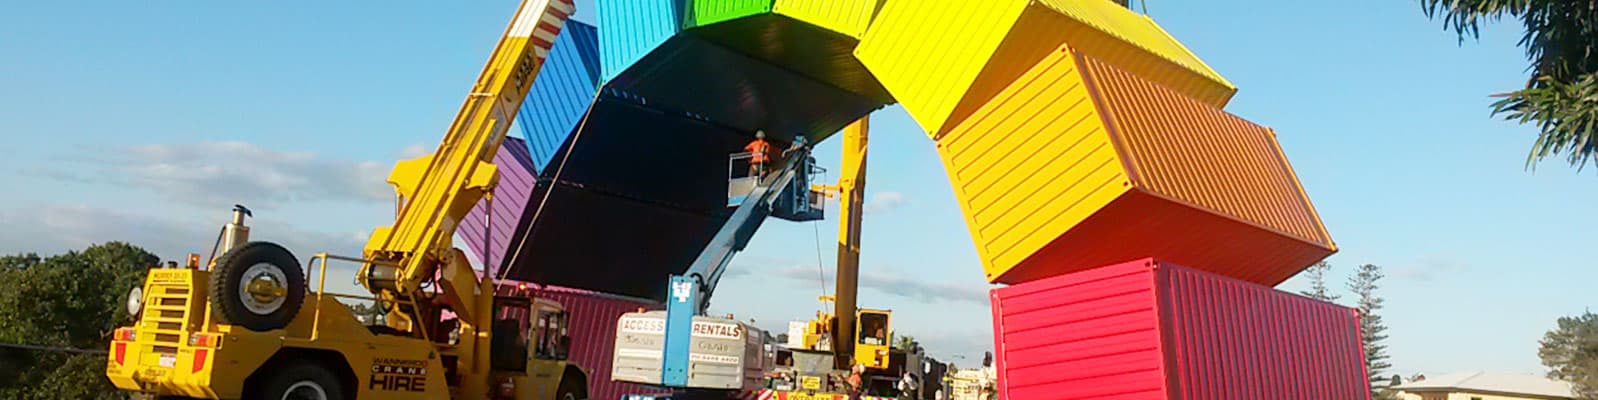 Containbow Art Installation in Fremantle with Wanneroo Crane Hire Cranes